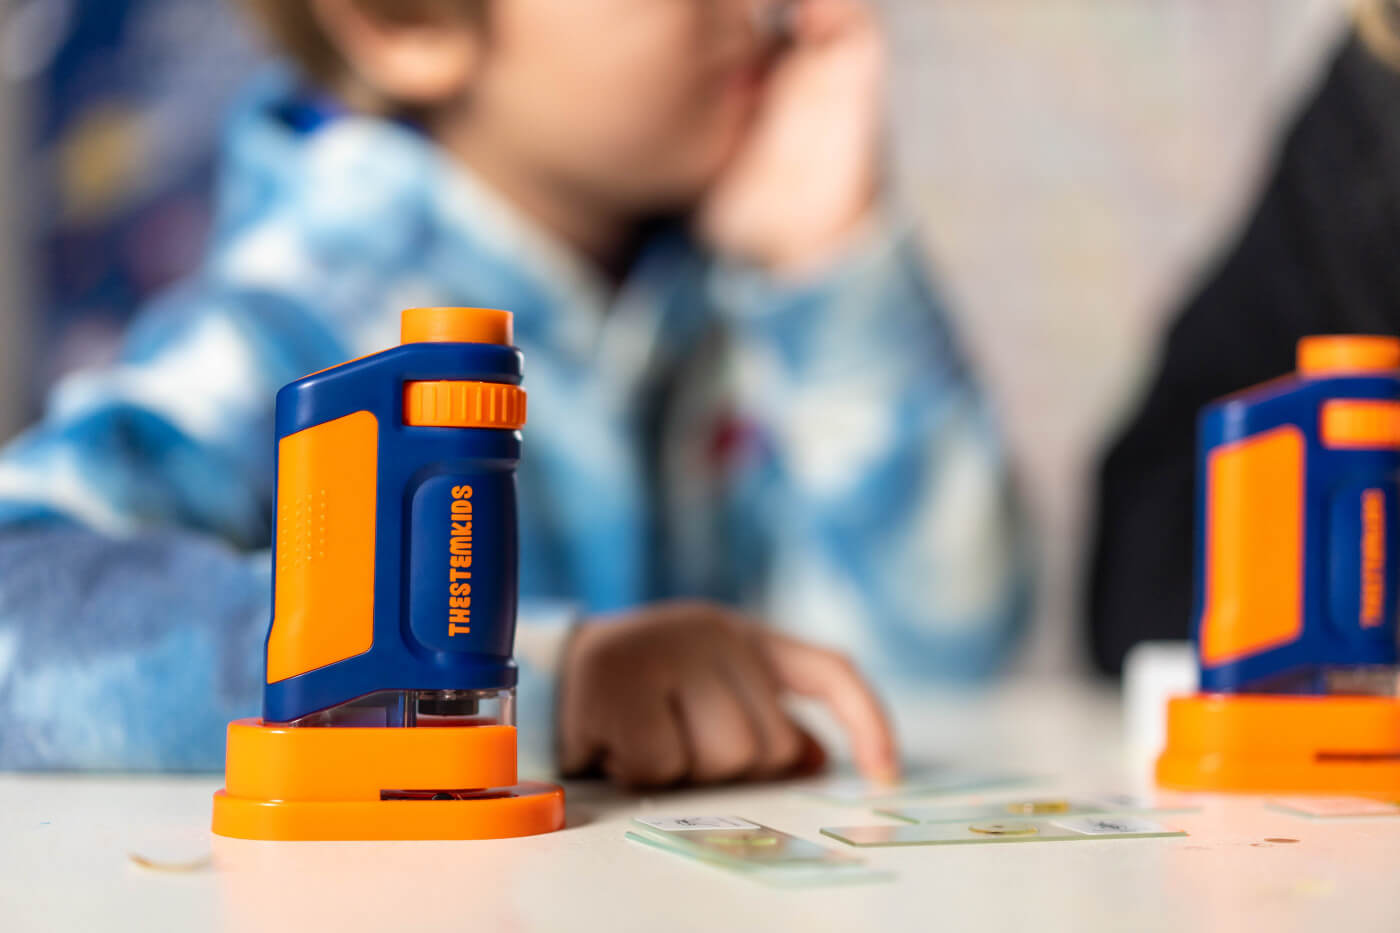 The STEMscope kids microscope featured is an excellent open-ended toy